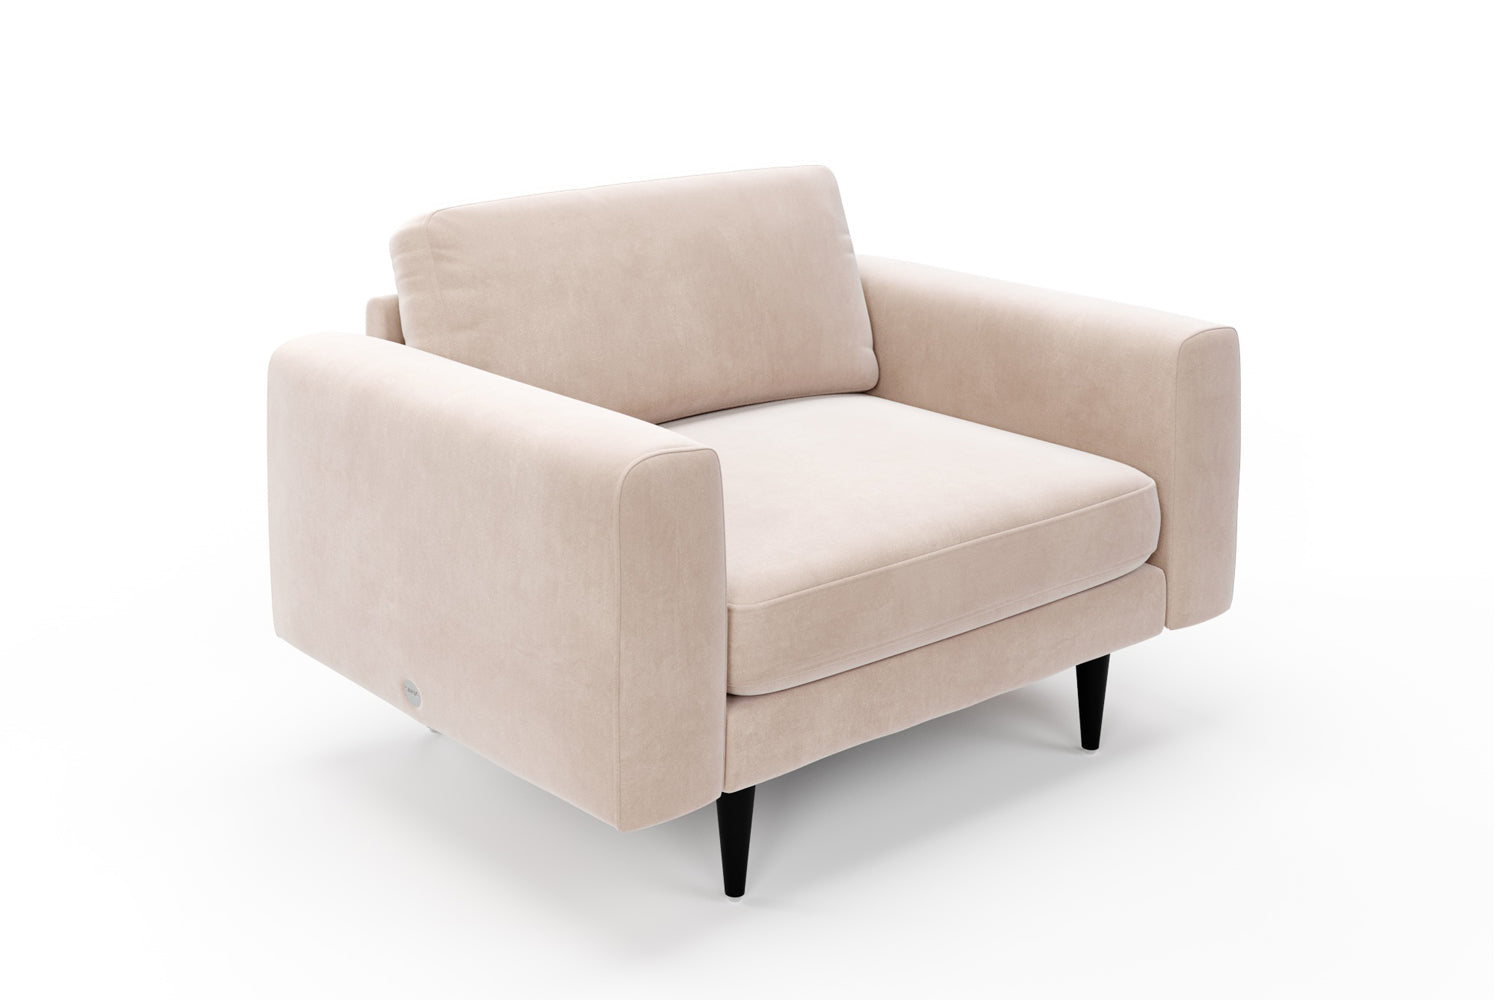 SNUG | The Big Chill 1.5 Seater Snuggler in Taupe